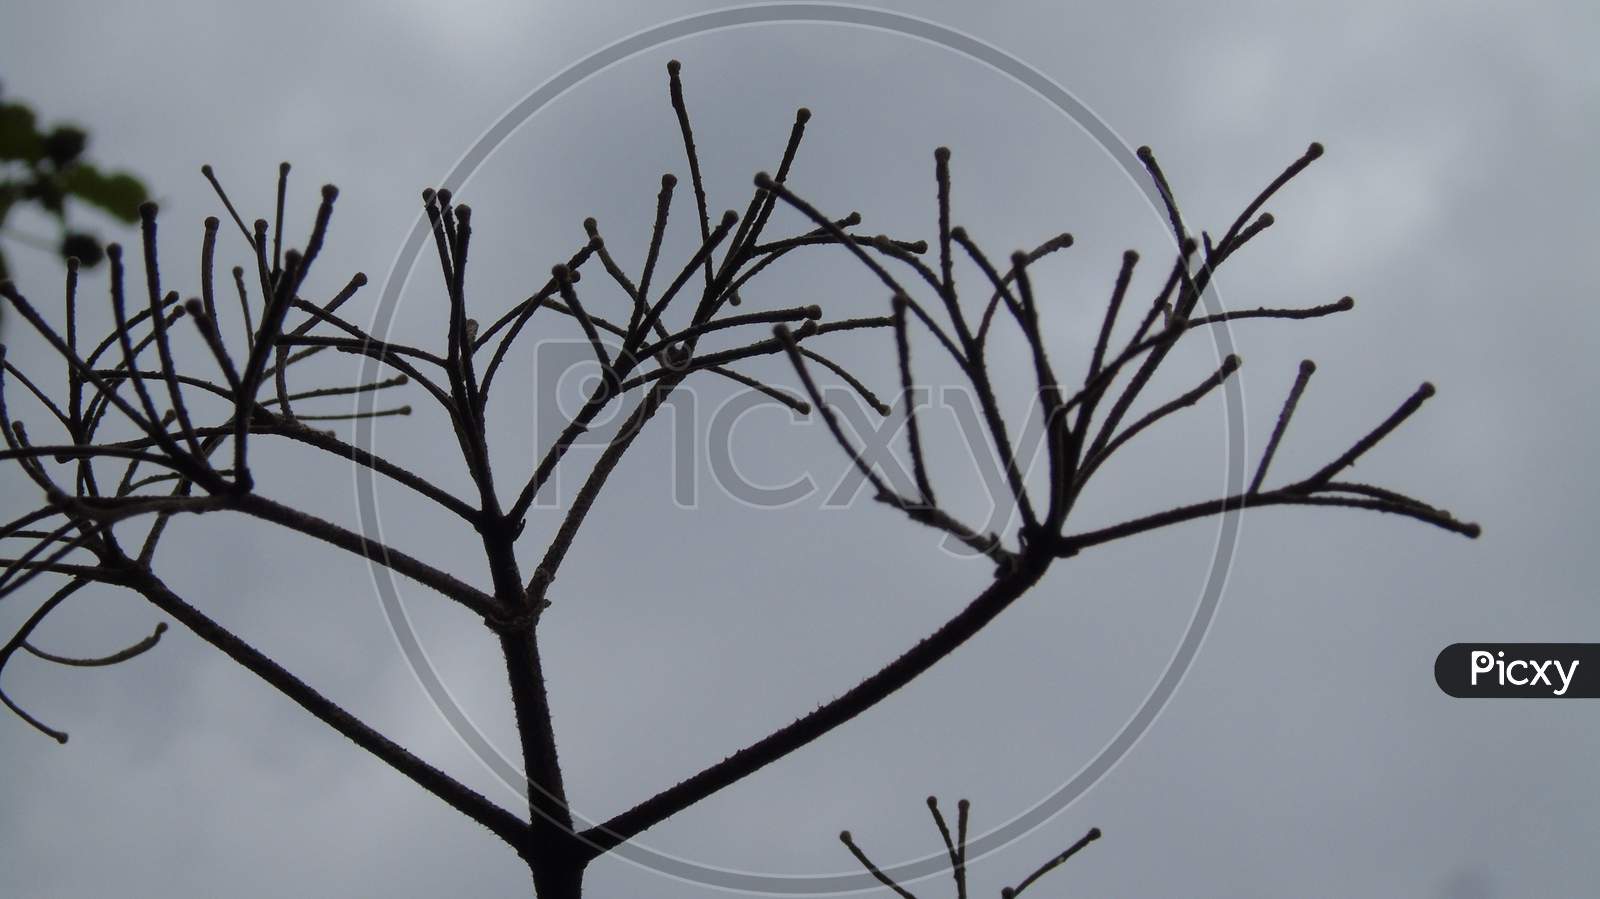 dead plant on sky background